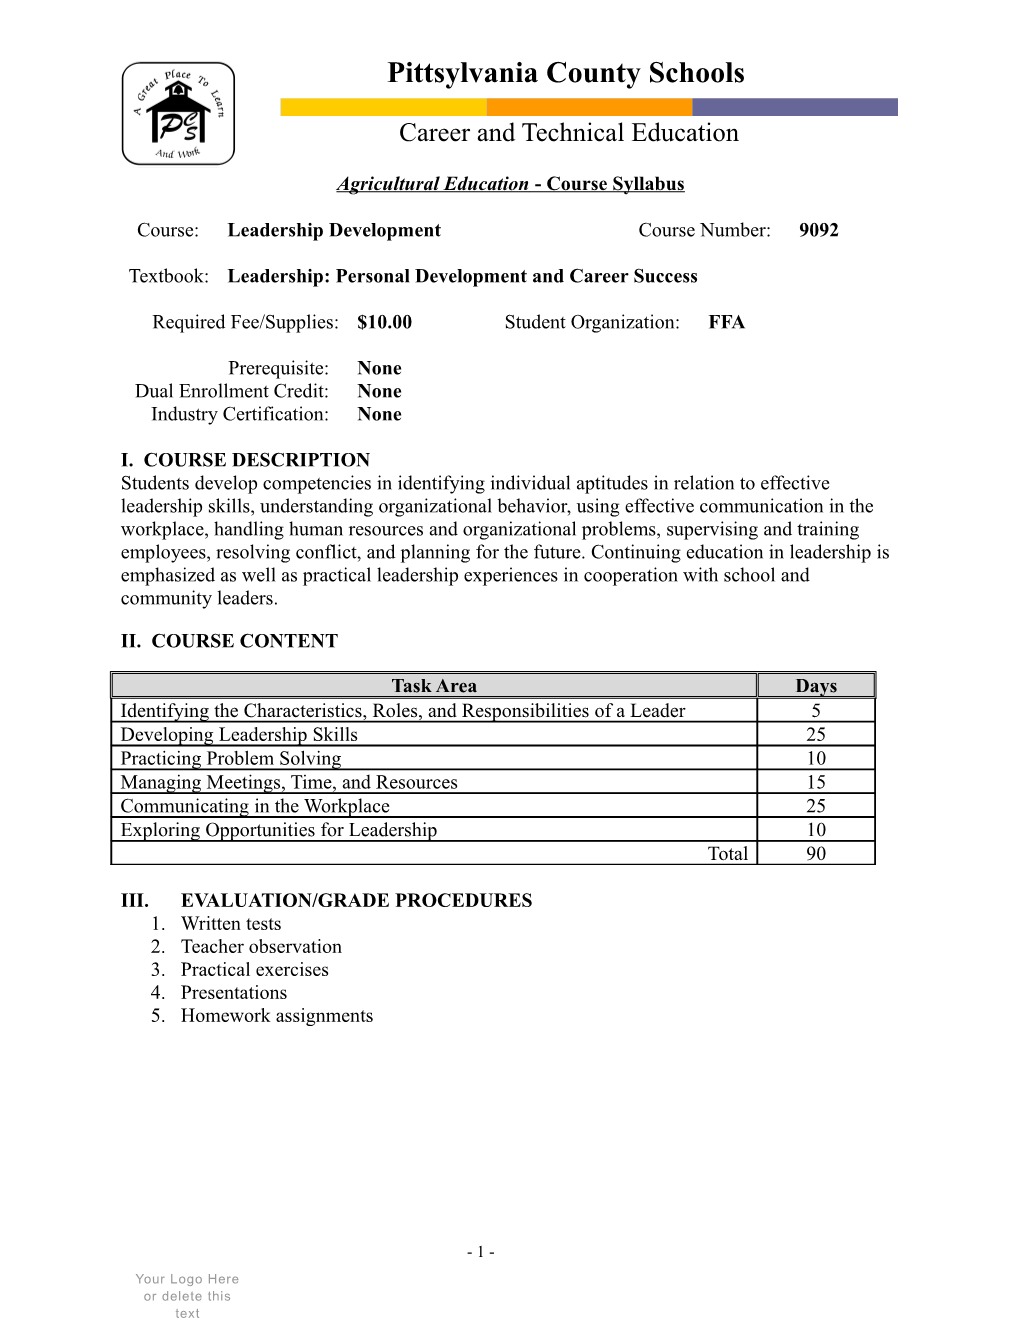 Agricultural Education Course Syllabus s1